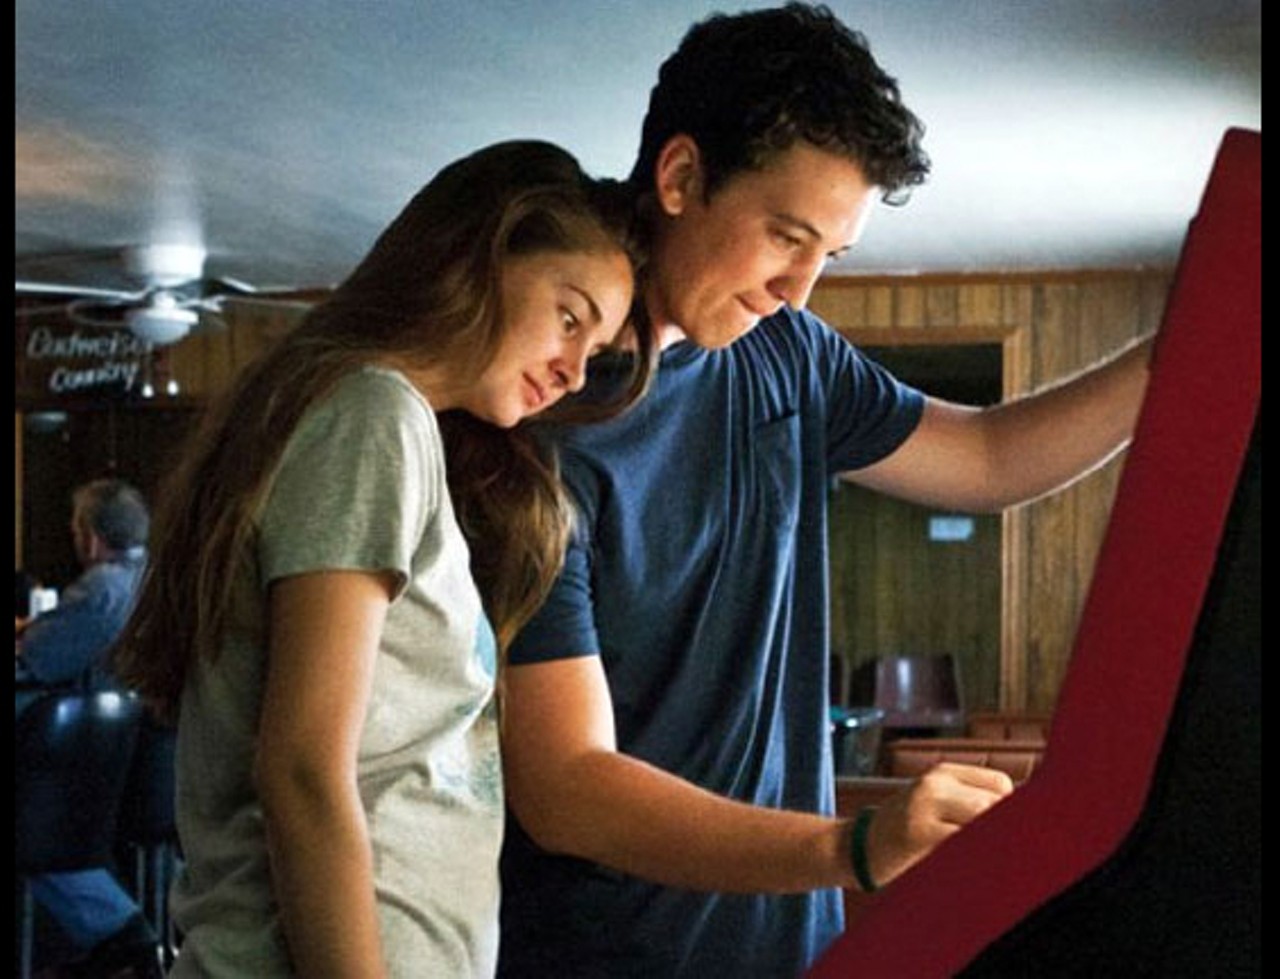 4. Miles Teller and Shailene Woodley in The Spectacular Now